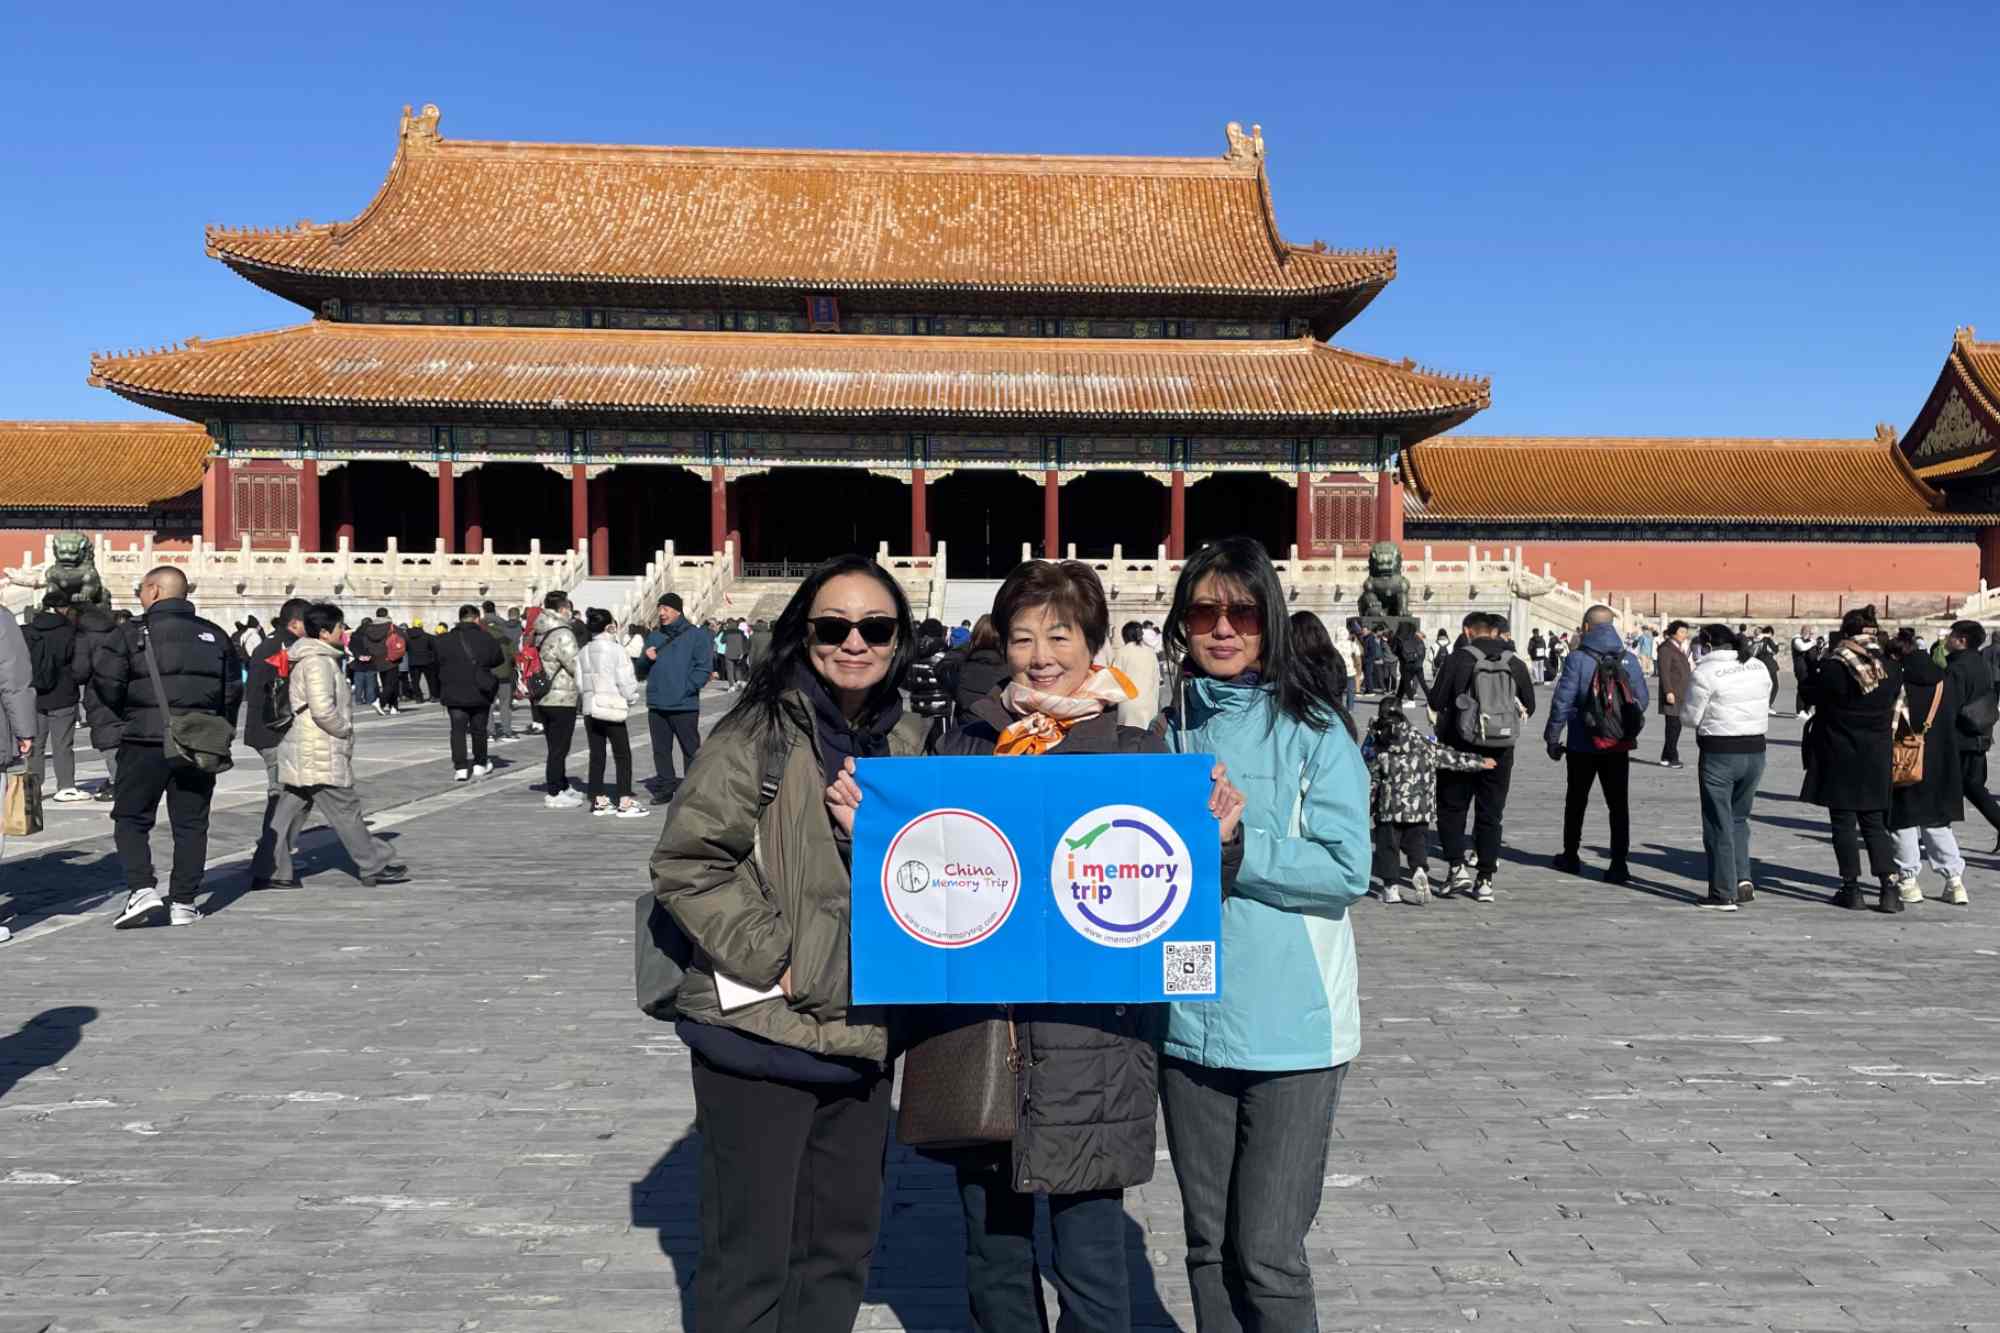 2-Day Beijing Private Tour of Tiananmen Square, Forbidden City, Temple of Heaven, Summer Palace and Mutianyu or Badaling Great Wall